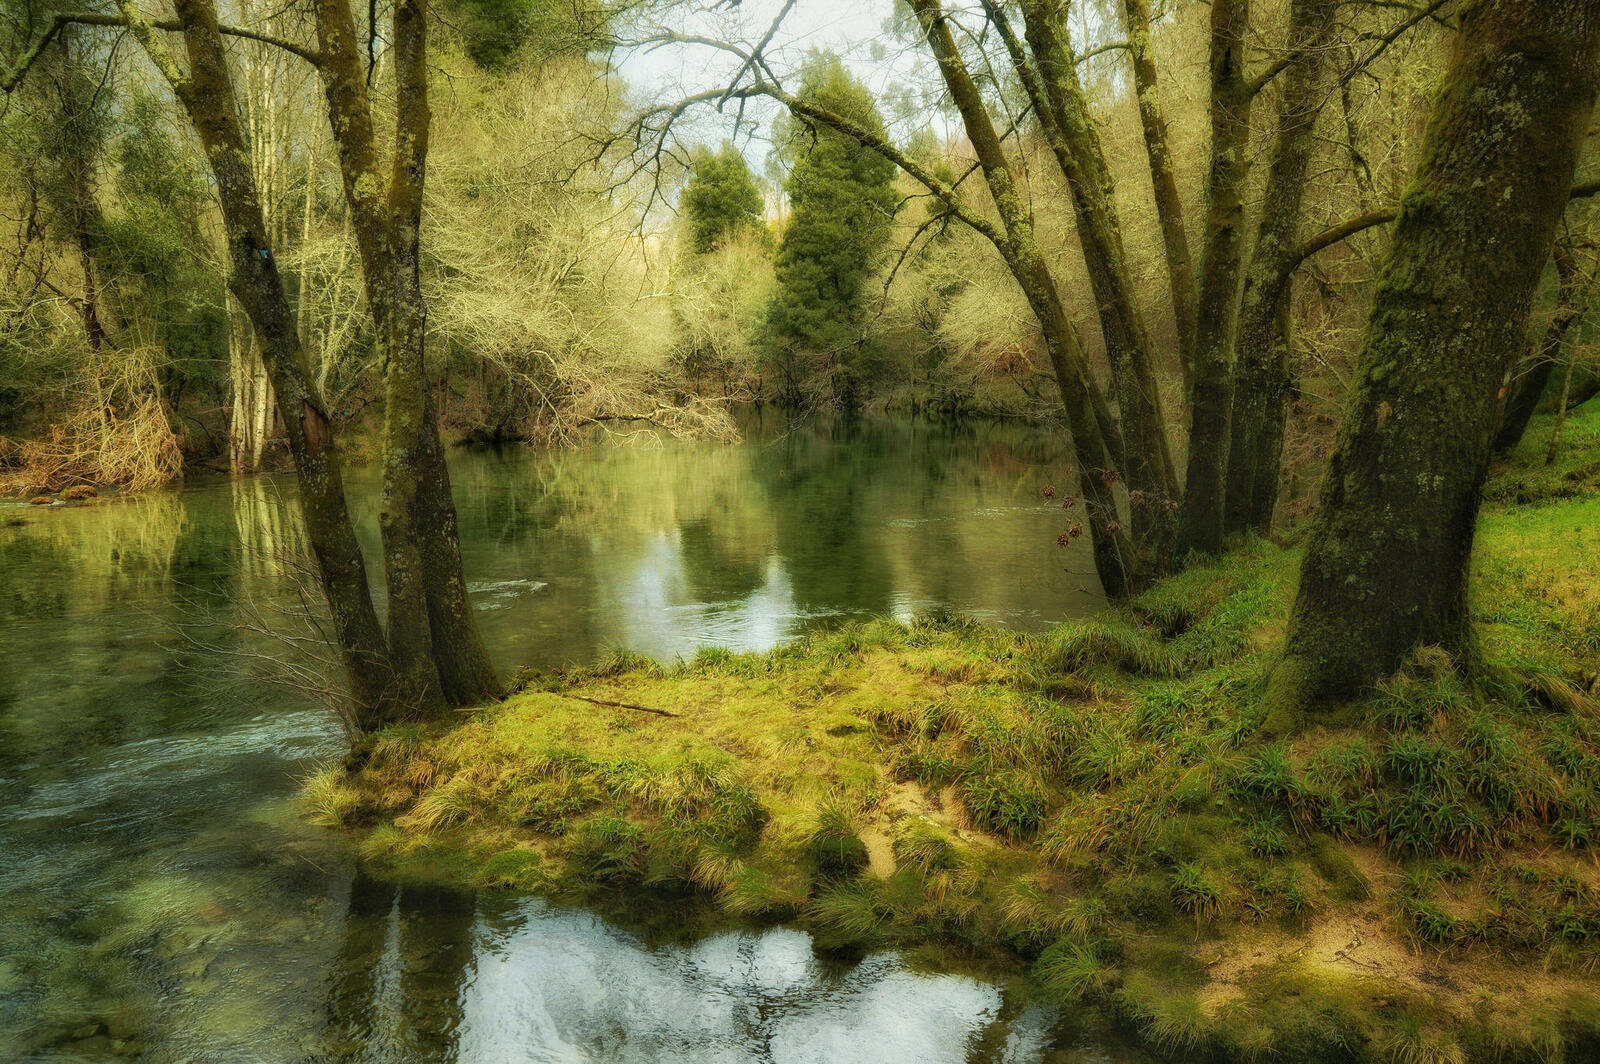 Wallpapers trees Galicia river on the desktop